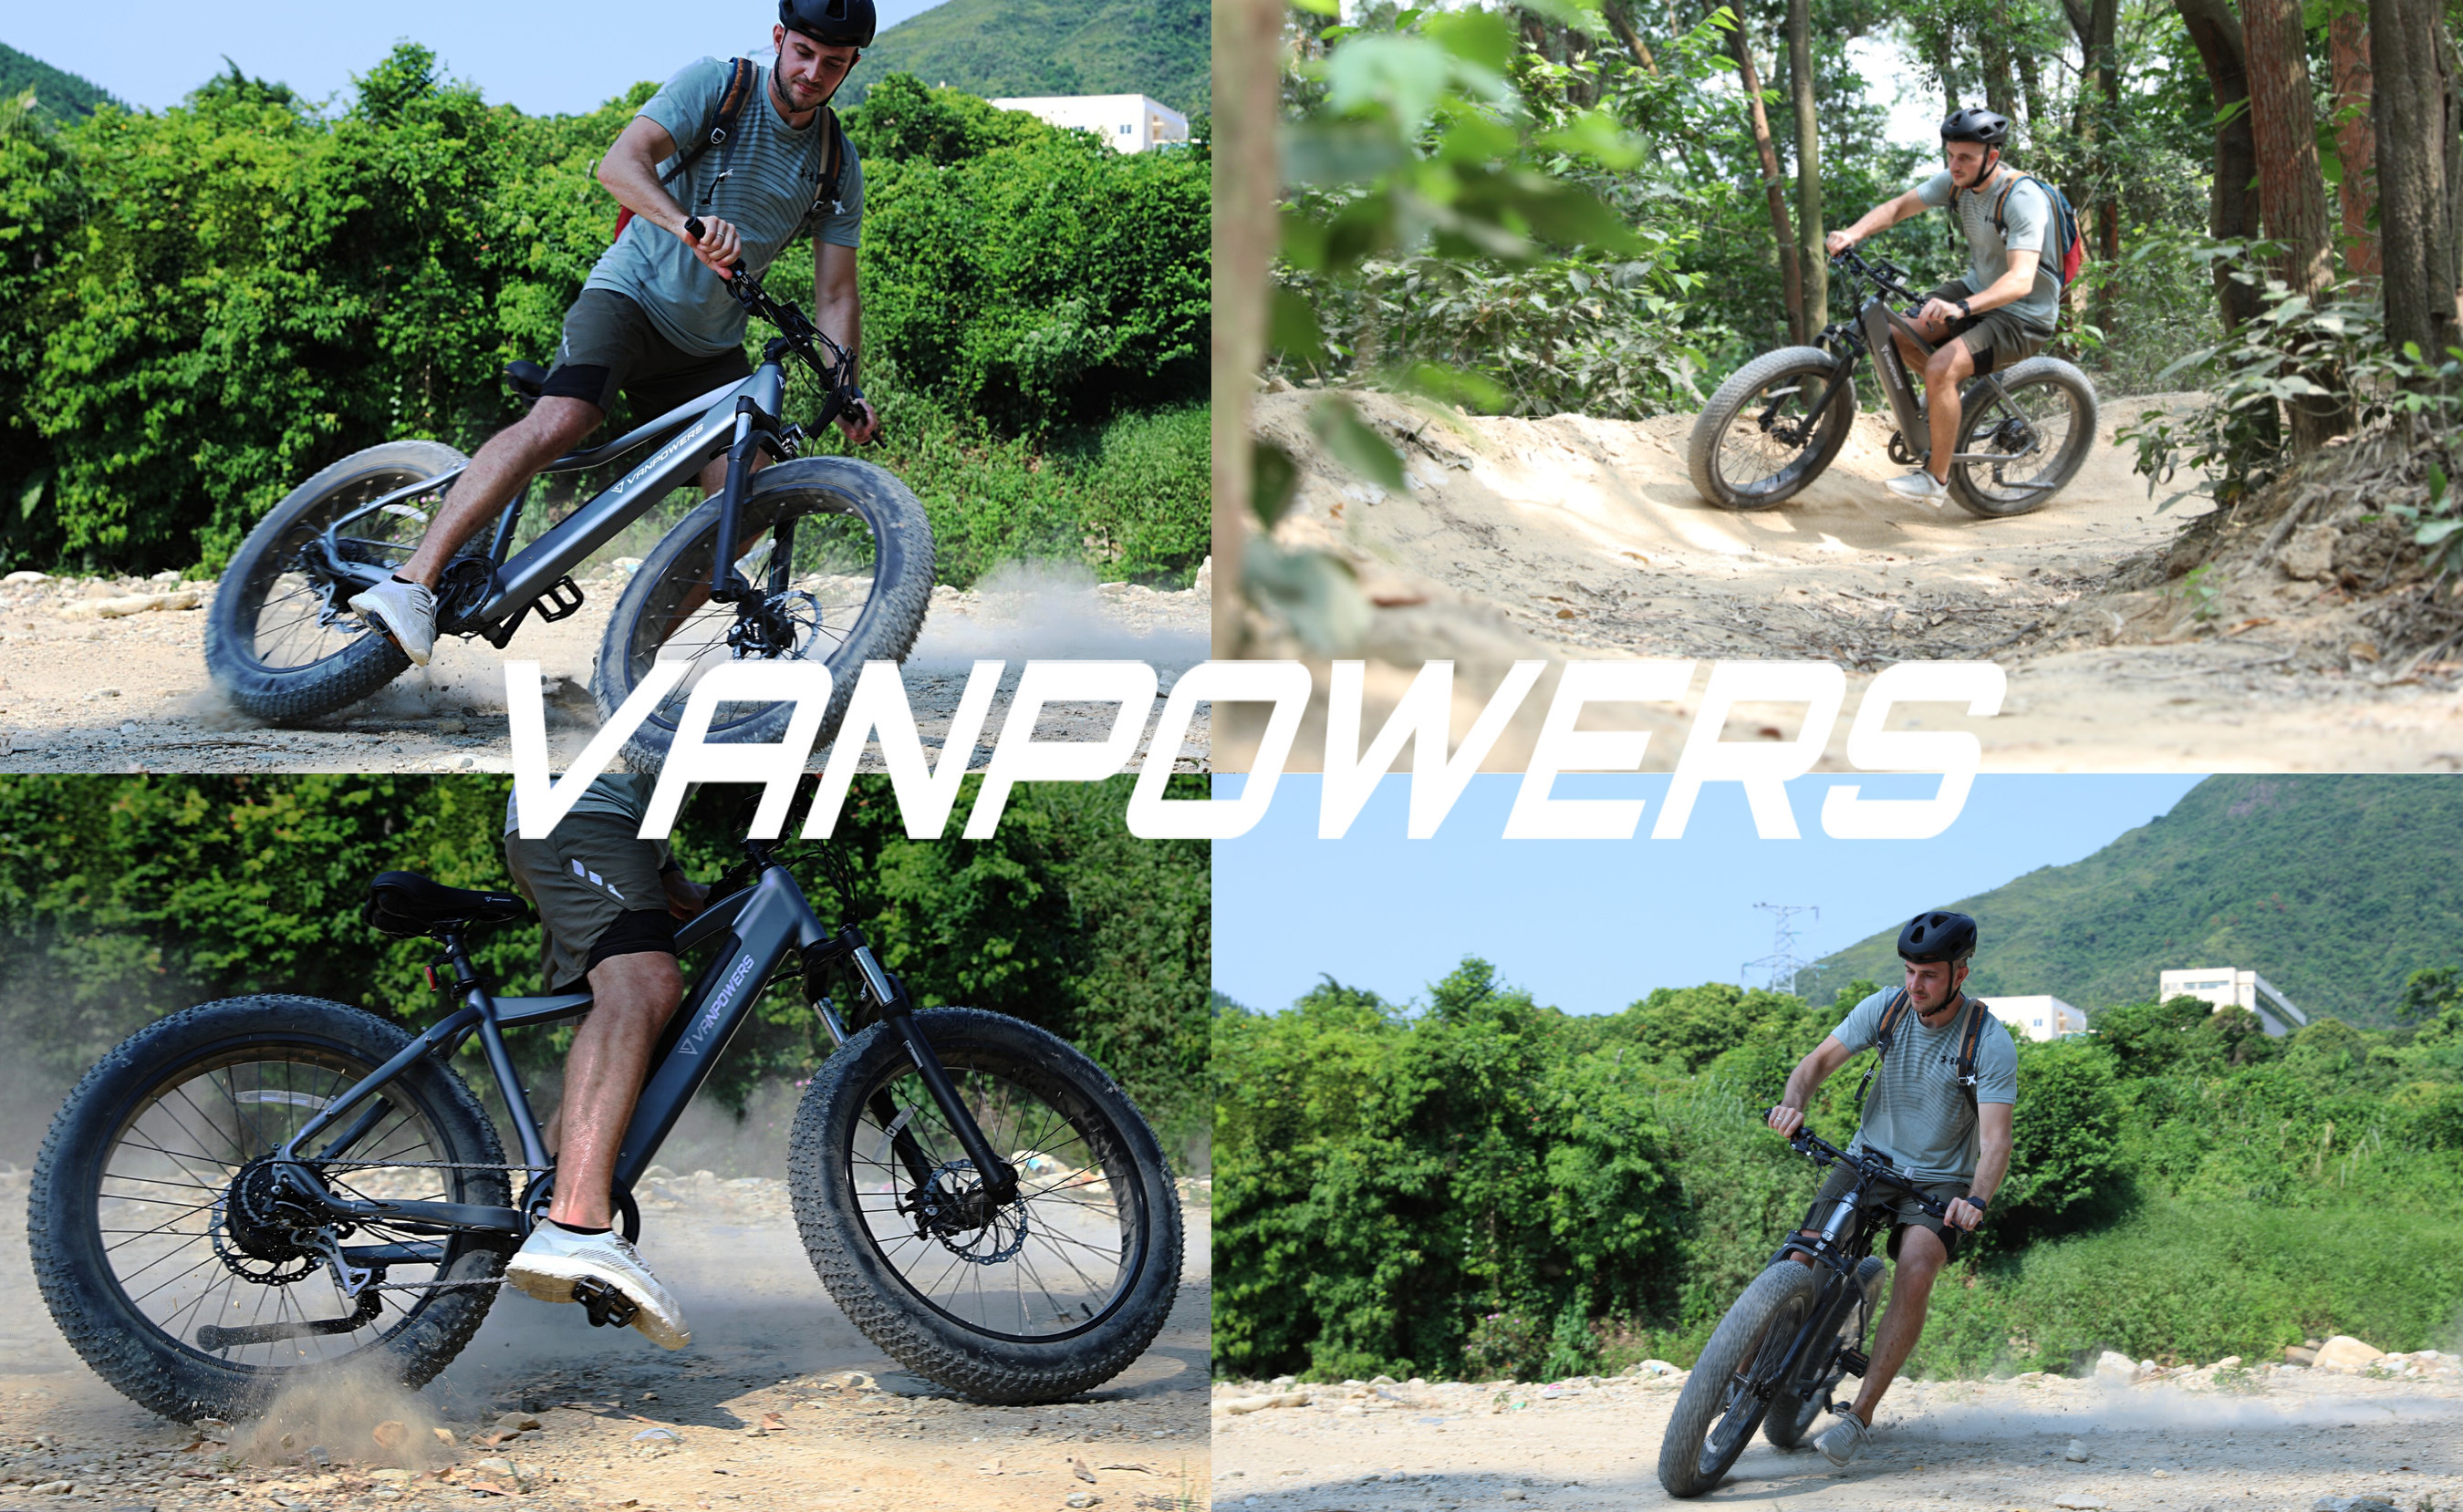 Vanpowers Bike Introduces New eMTB Model Manidae and Expands E-Bike Product Line